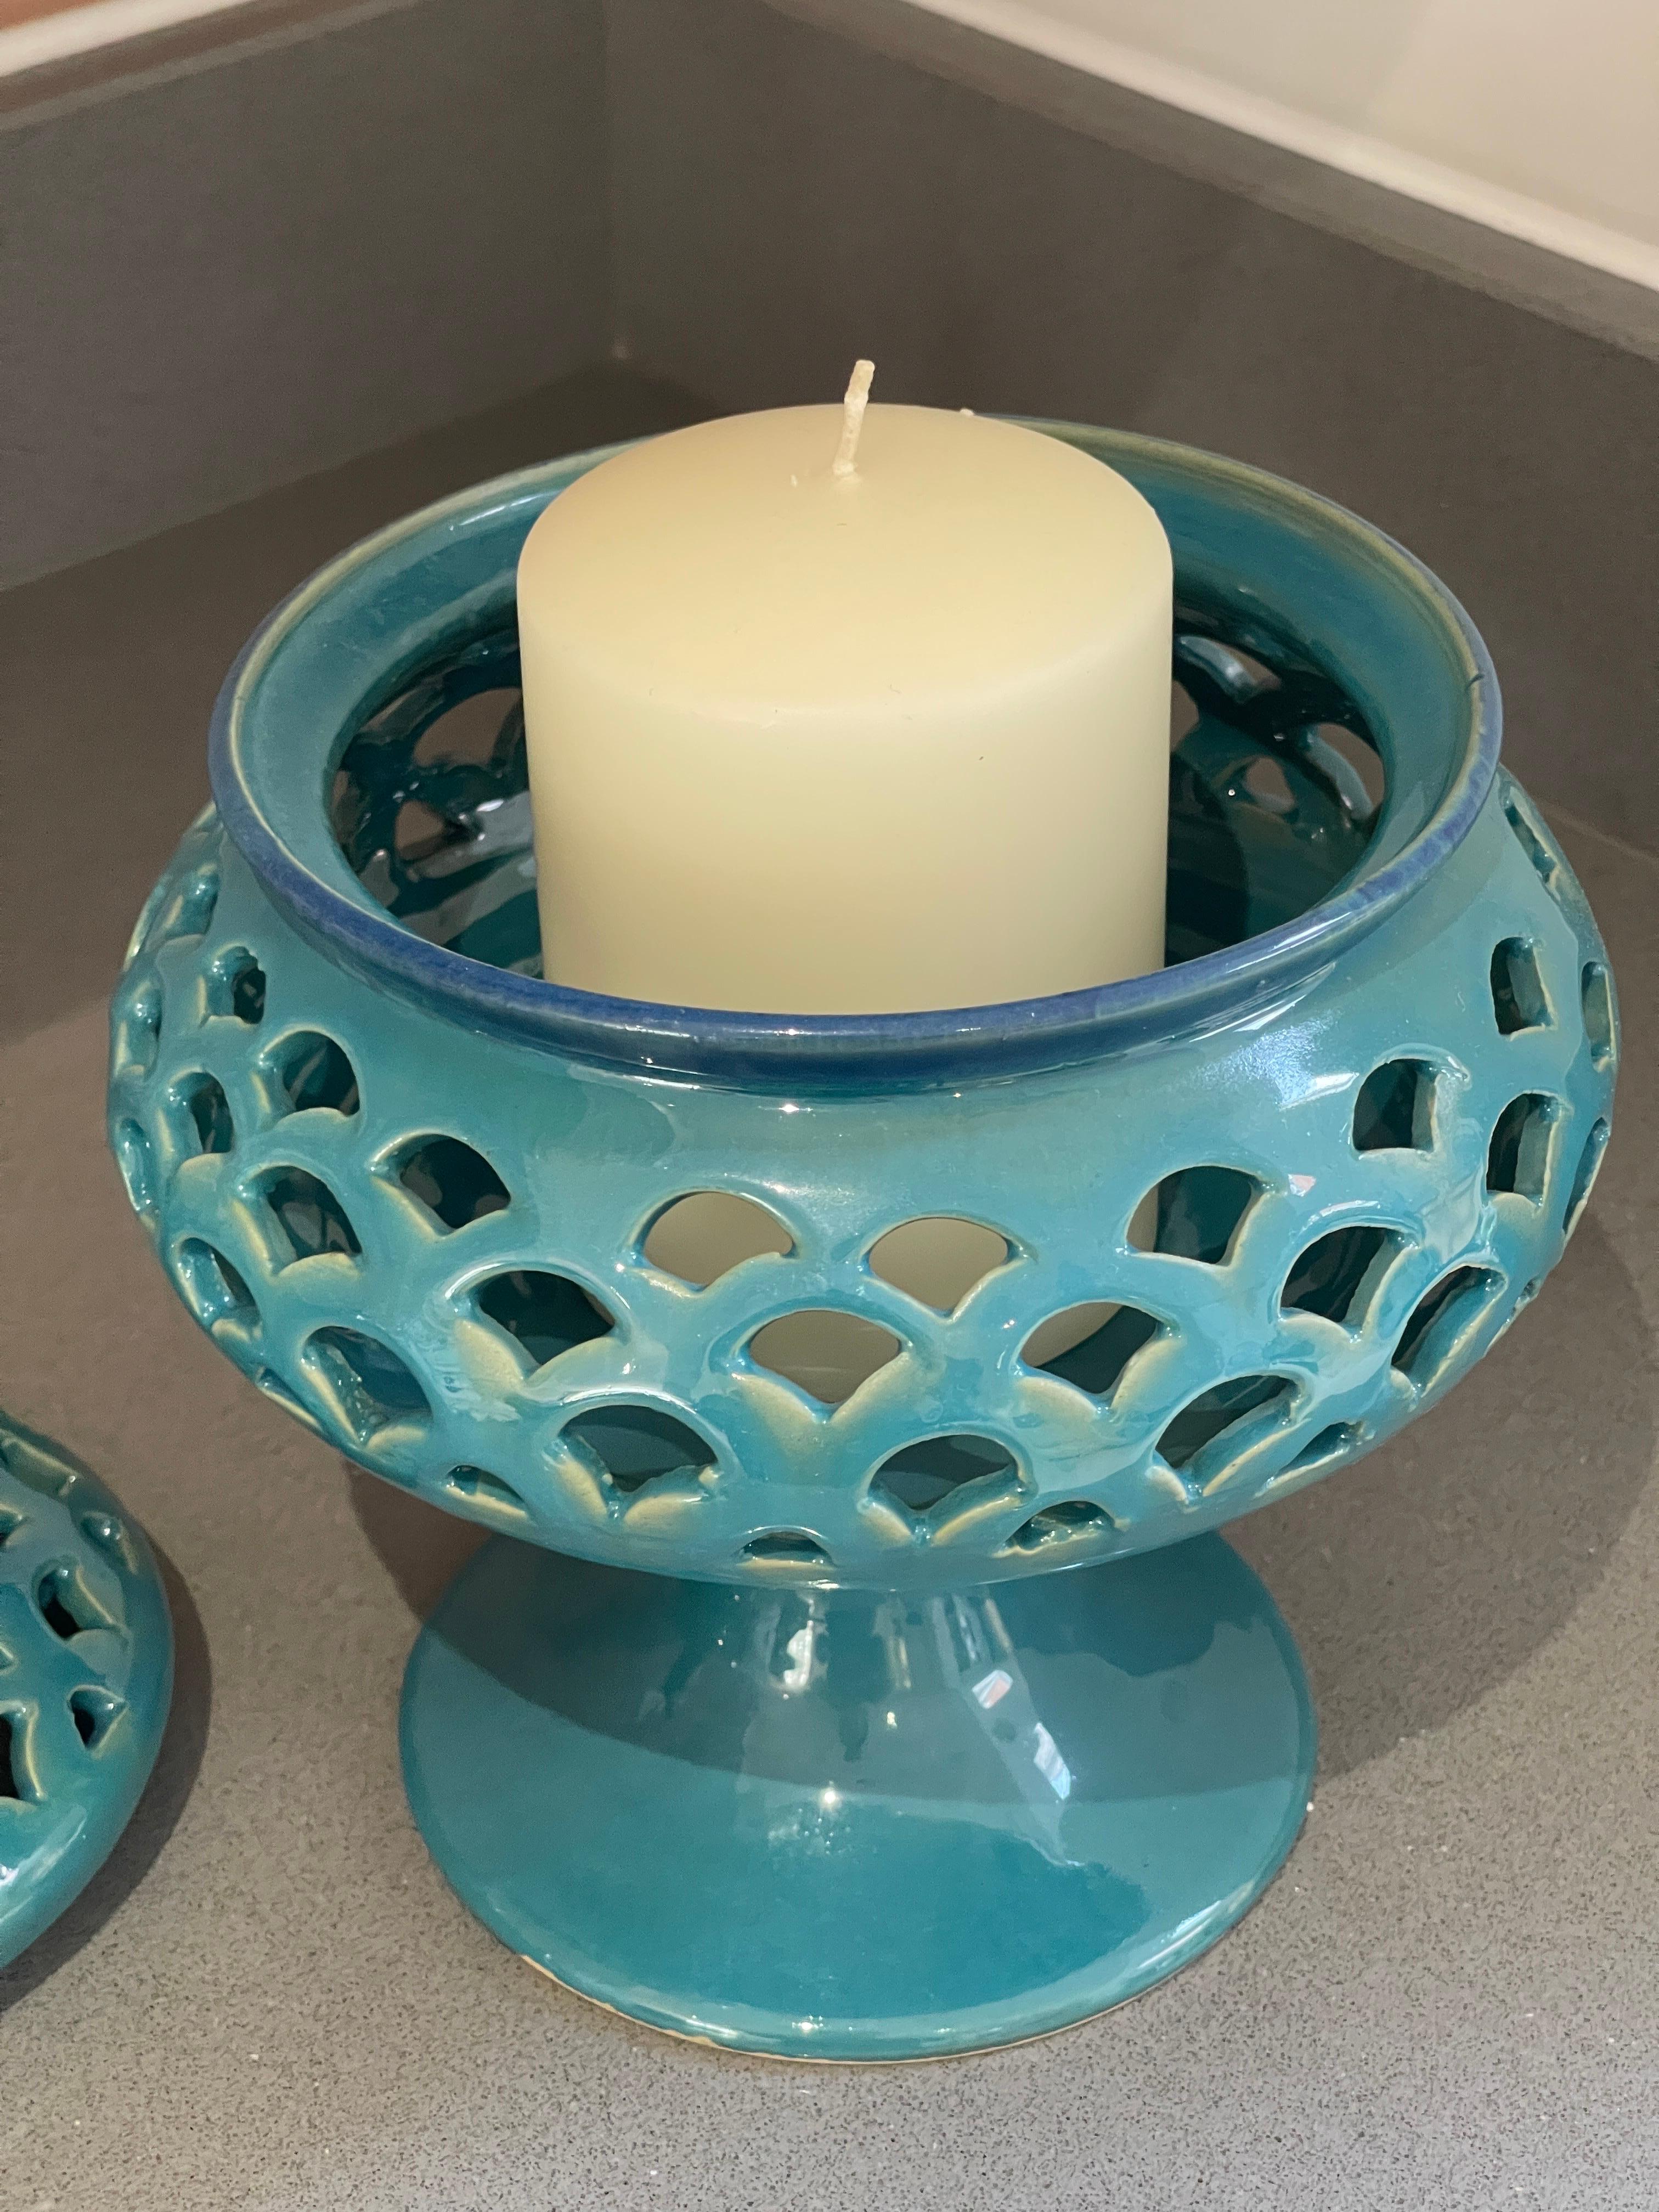 Candle Holder Hand Crafted Blue Ceramic Torches With Stand &Lid 7